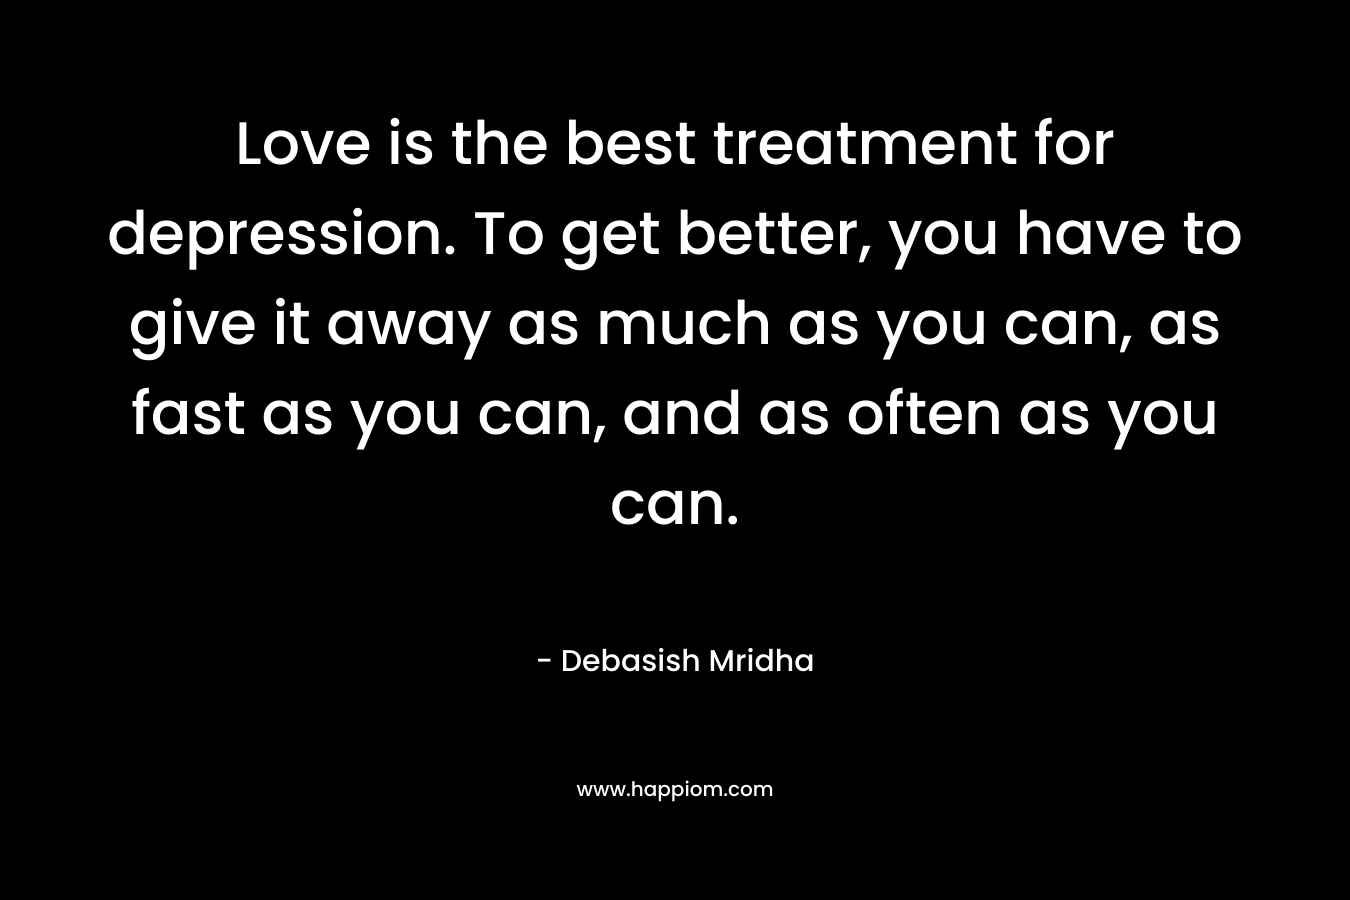 Love is the best treatment for depression. To get better, you have to give it away as much as you can, as fast as you can, and as often as you can.